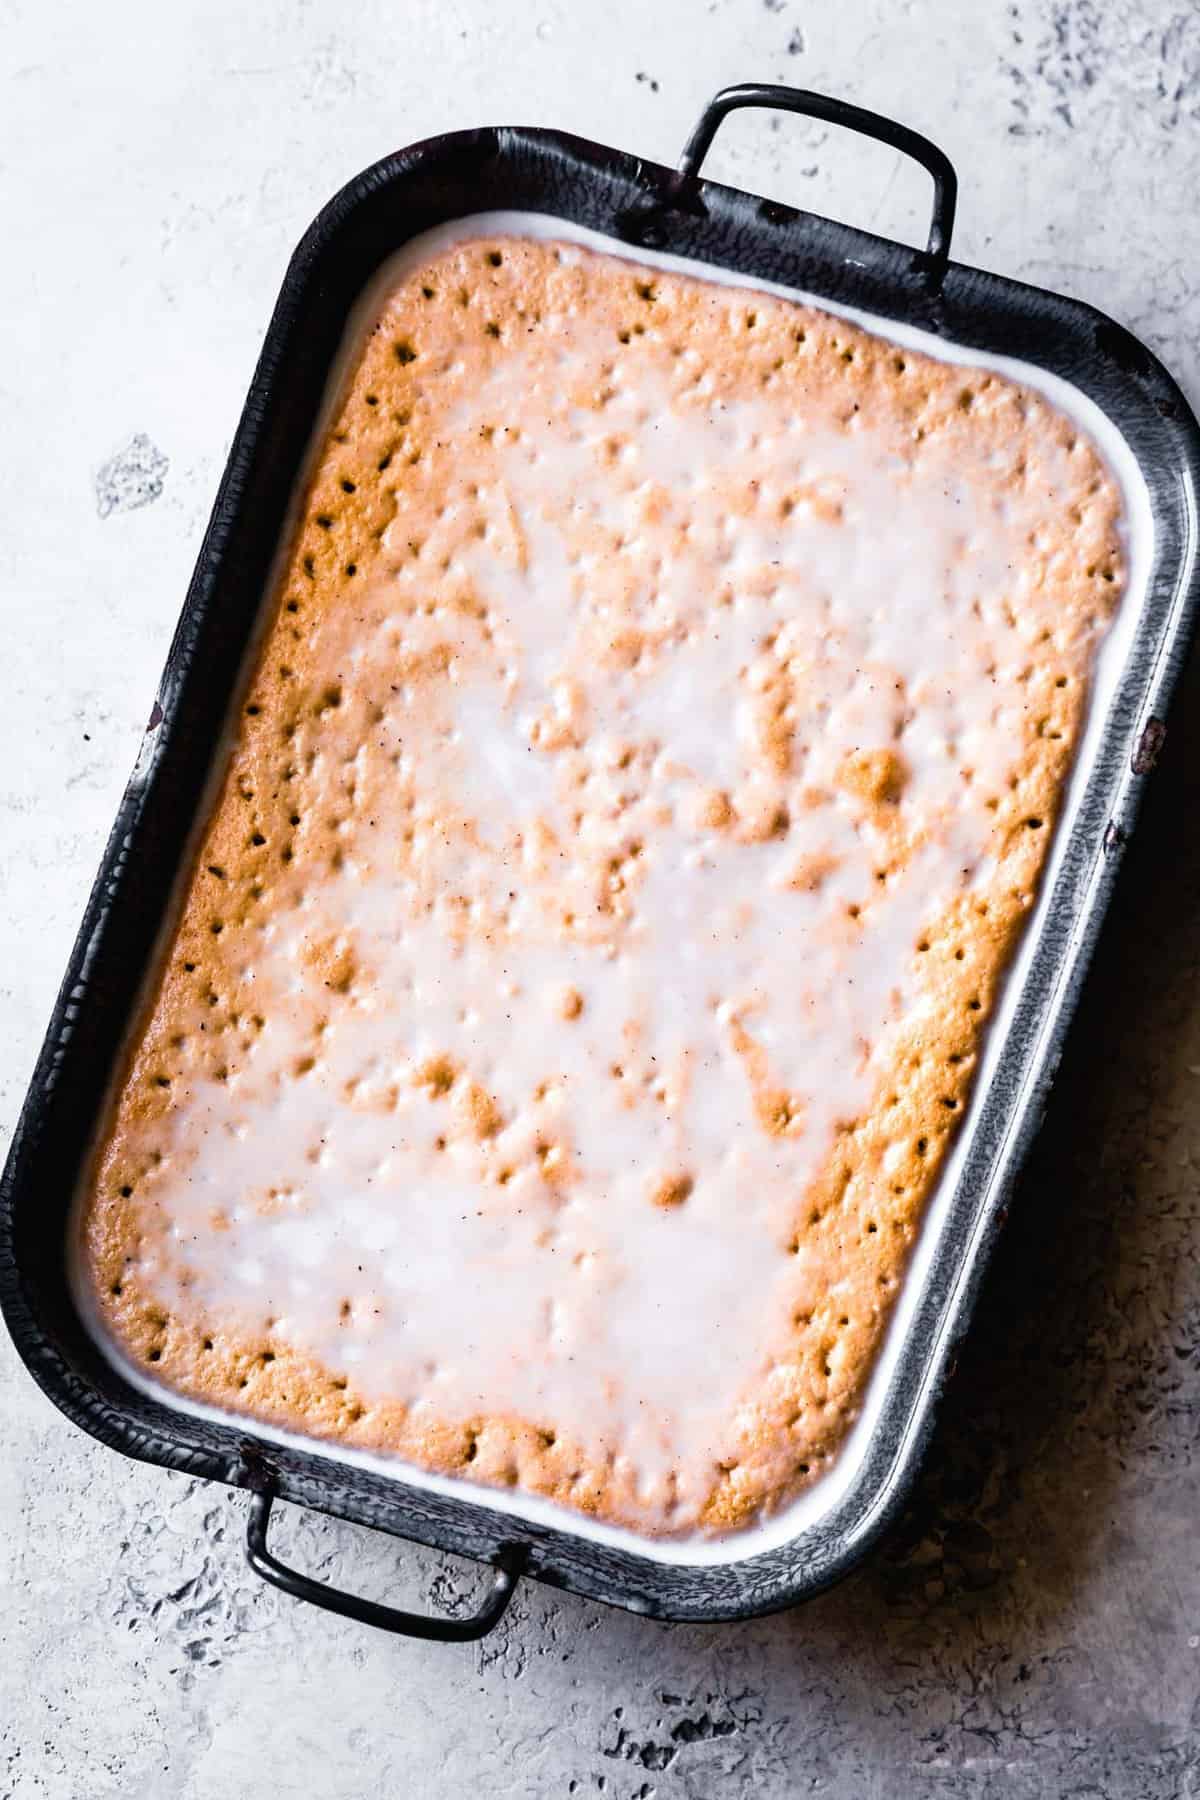 Tres leches cake in the pan with holes poked in the cake and creamy vanilla-flecked milk mixture pooling on top